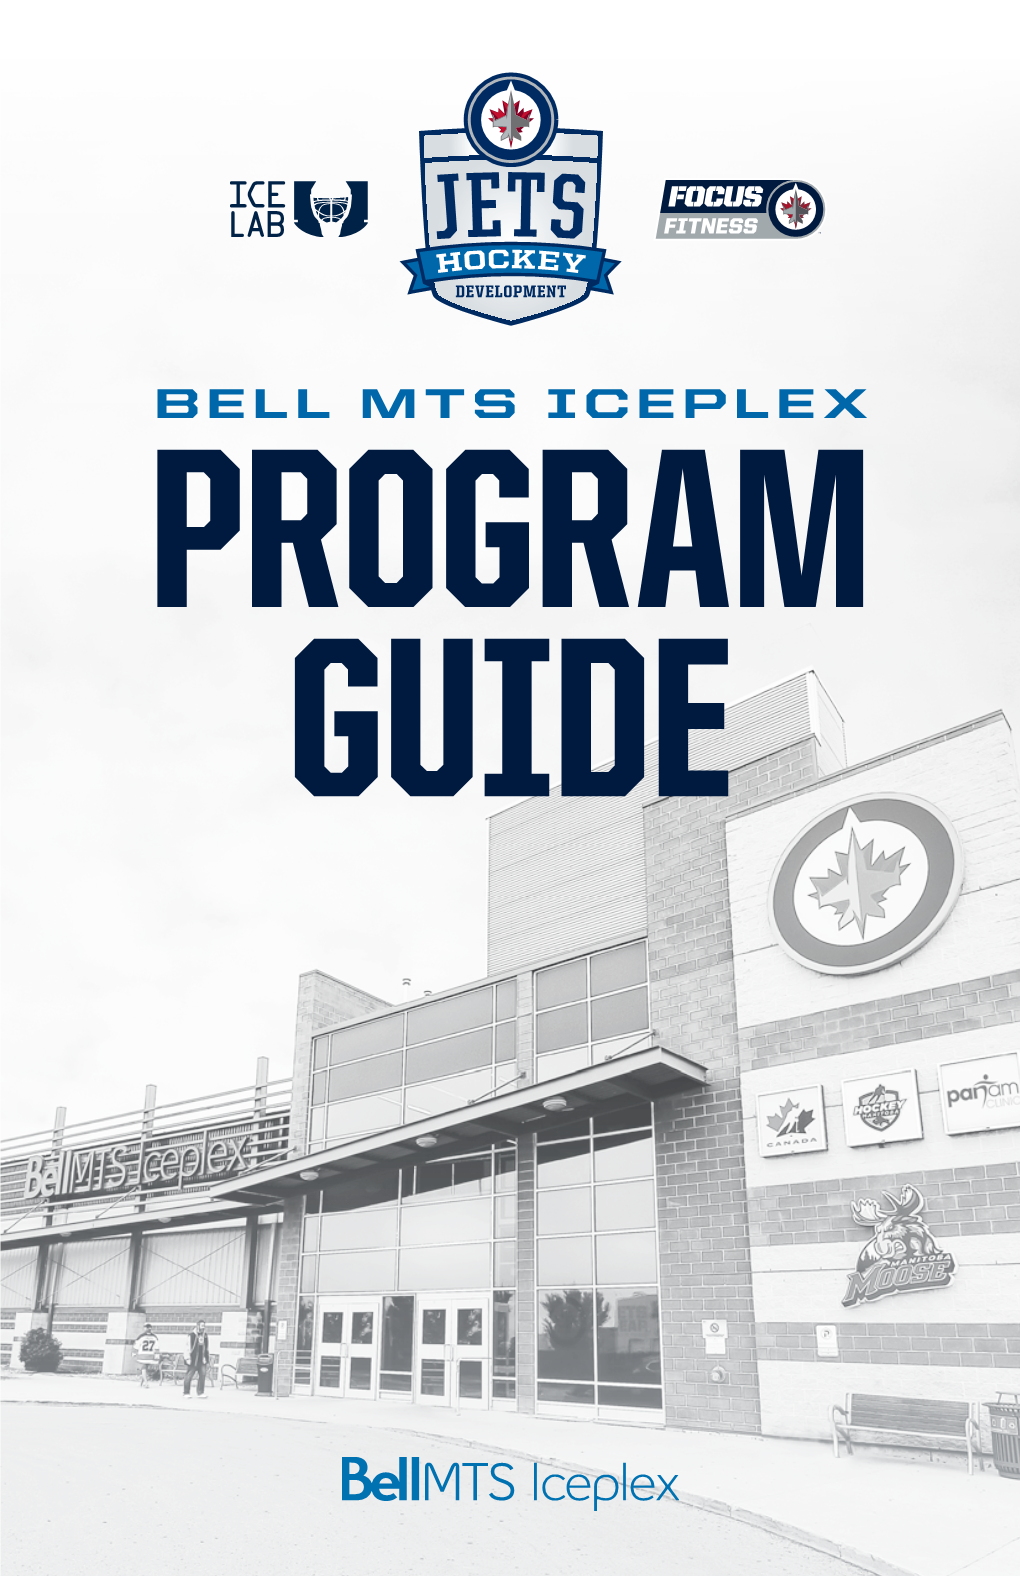 BELL MTS ICEPLEX PROGRAM GUIDE Welcome to Bell MTS Iceplex